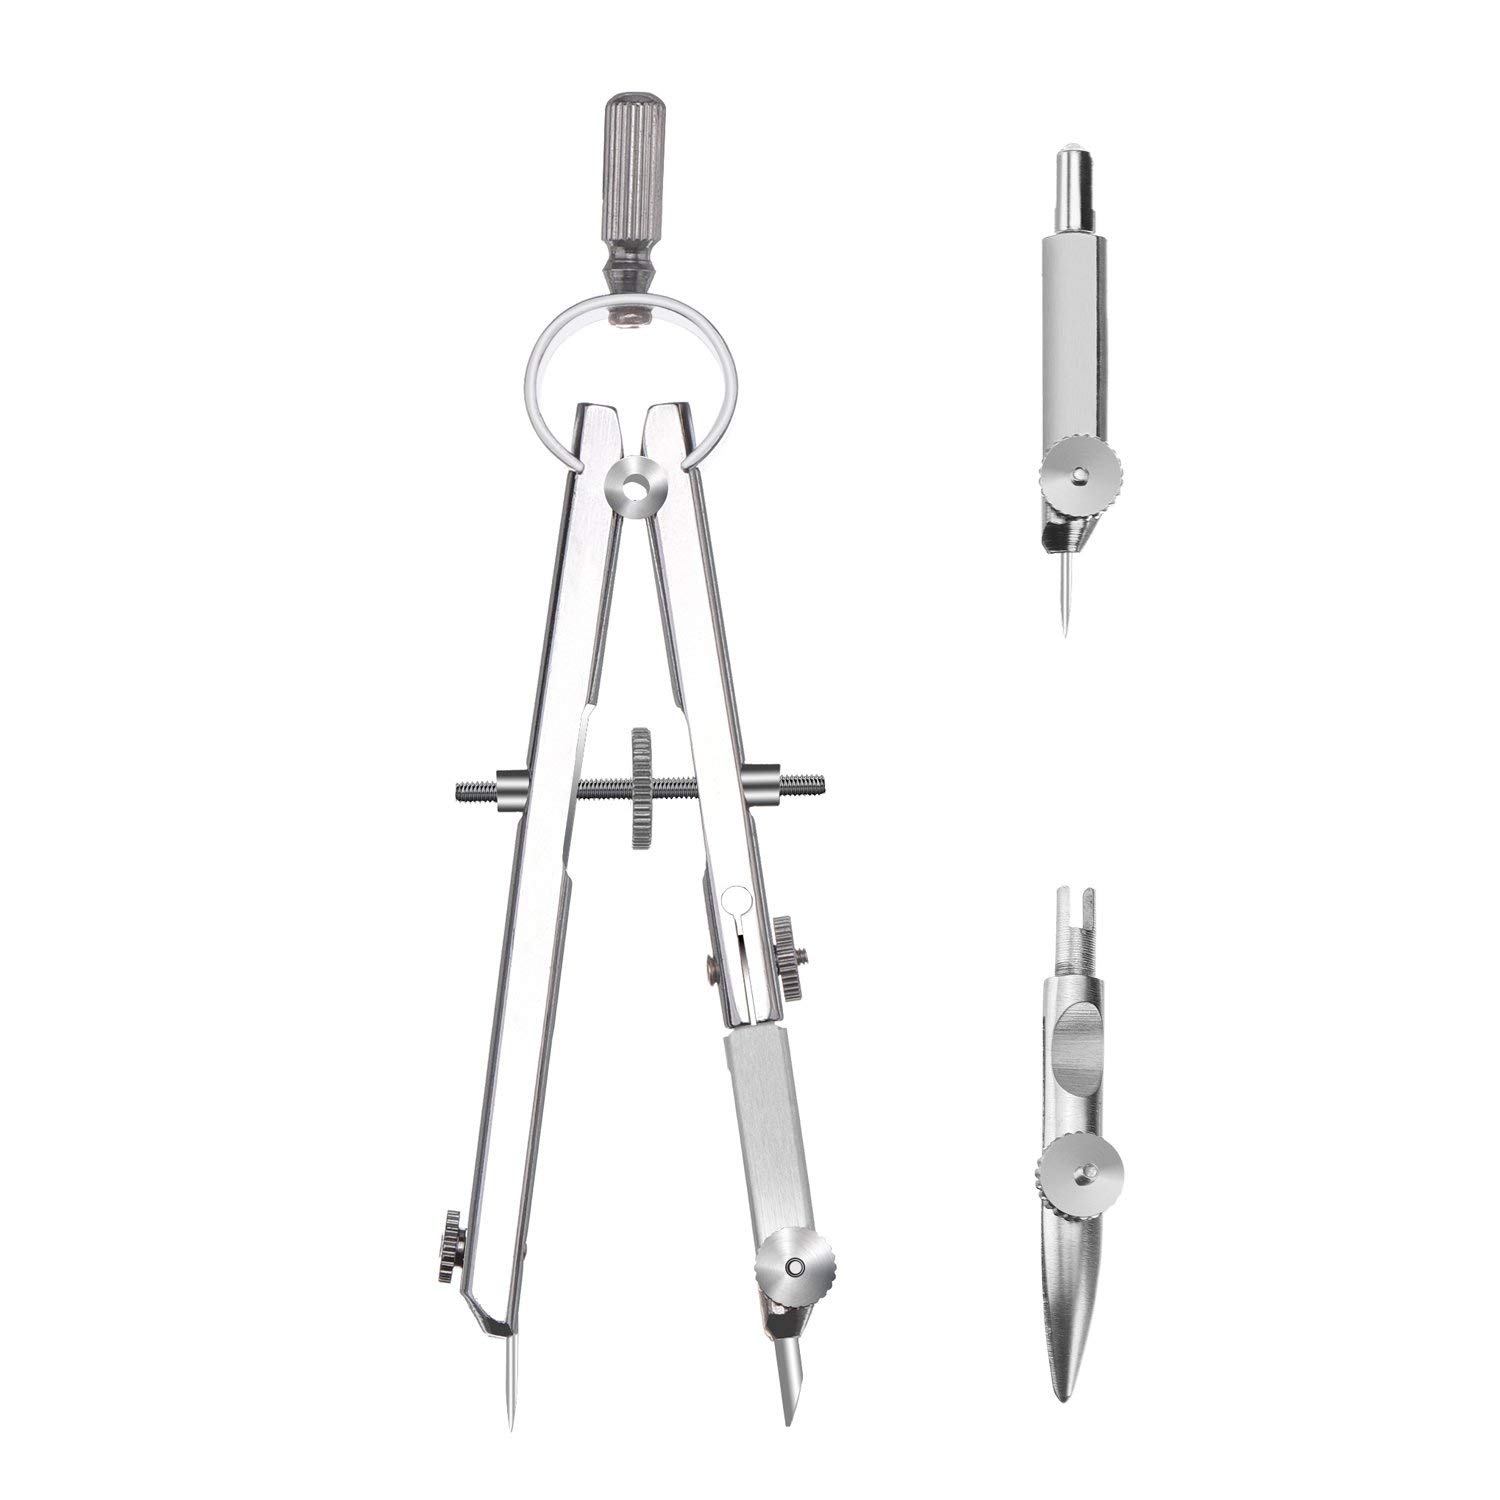 Amazon.com : eBoot Stainless Steel Student Spring Compass Precision ...